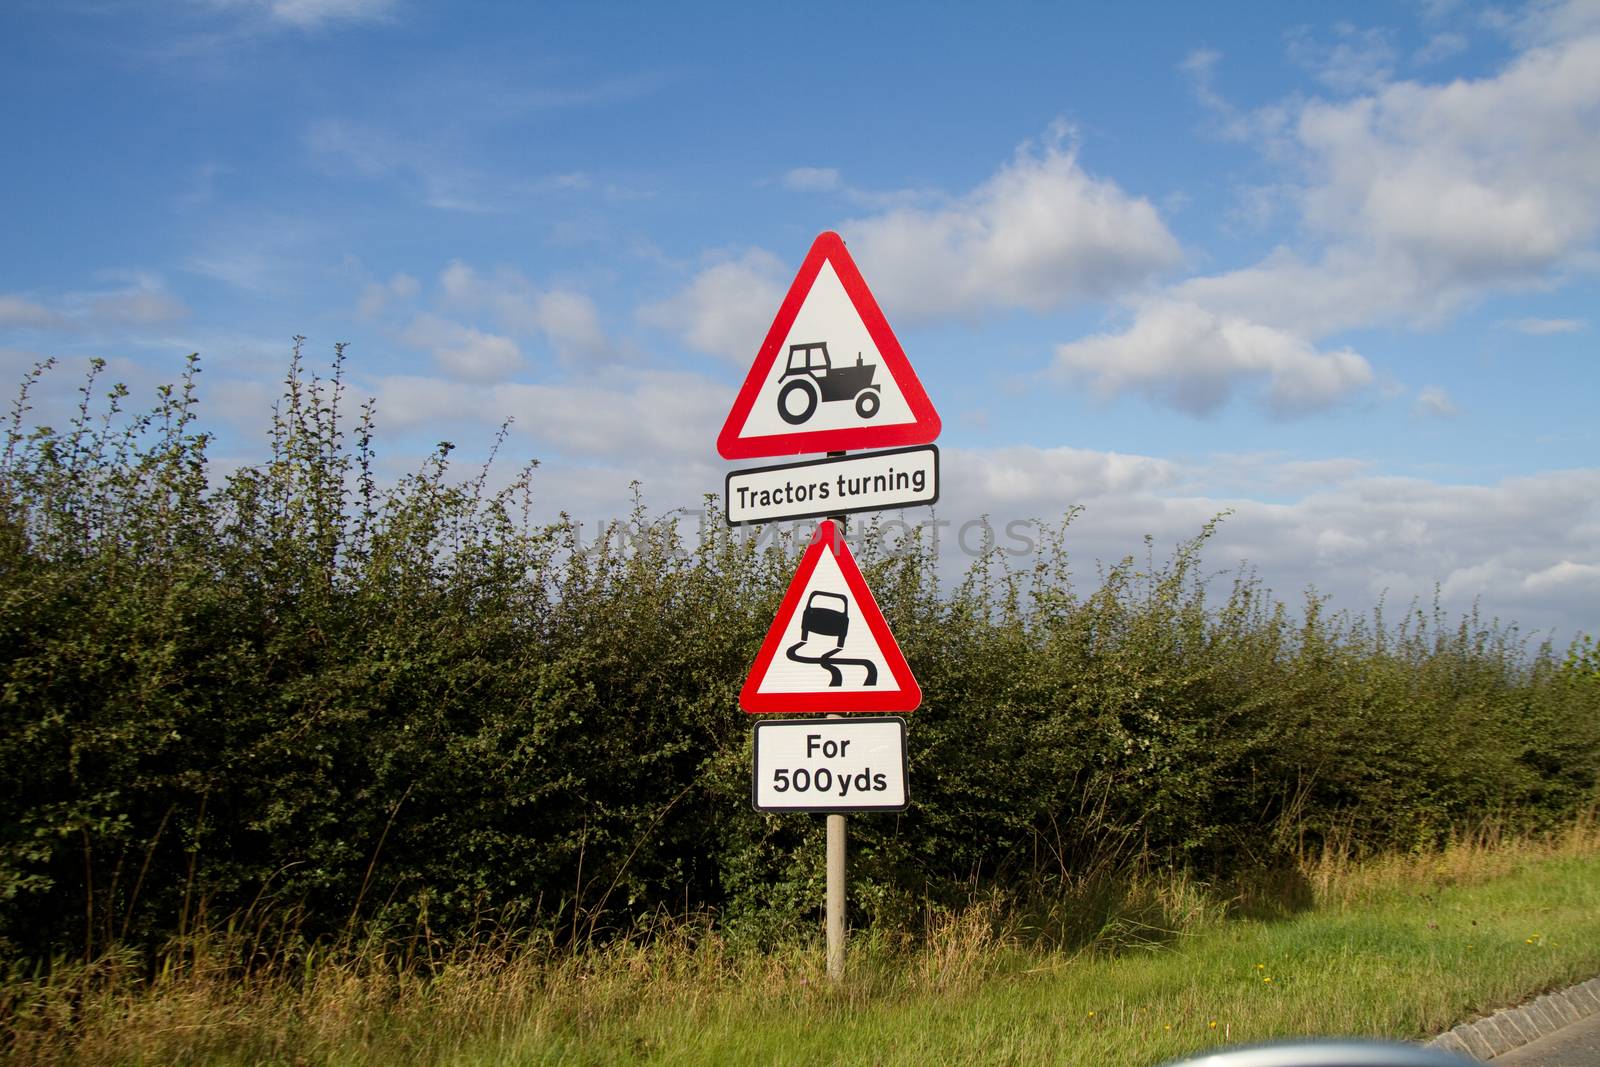 Tractor and Swerve Road Sign in England